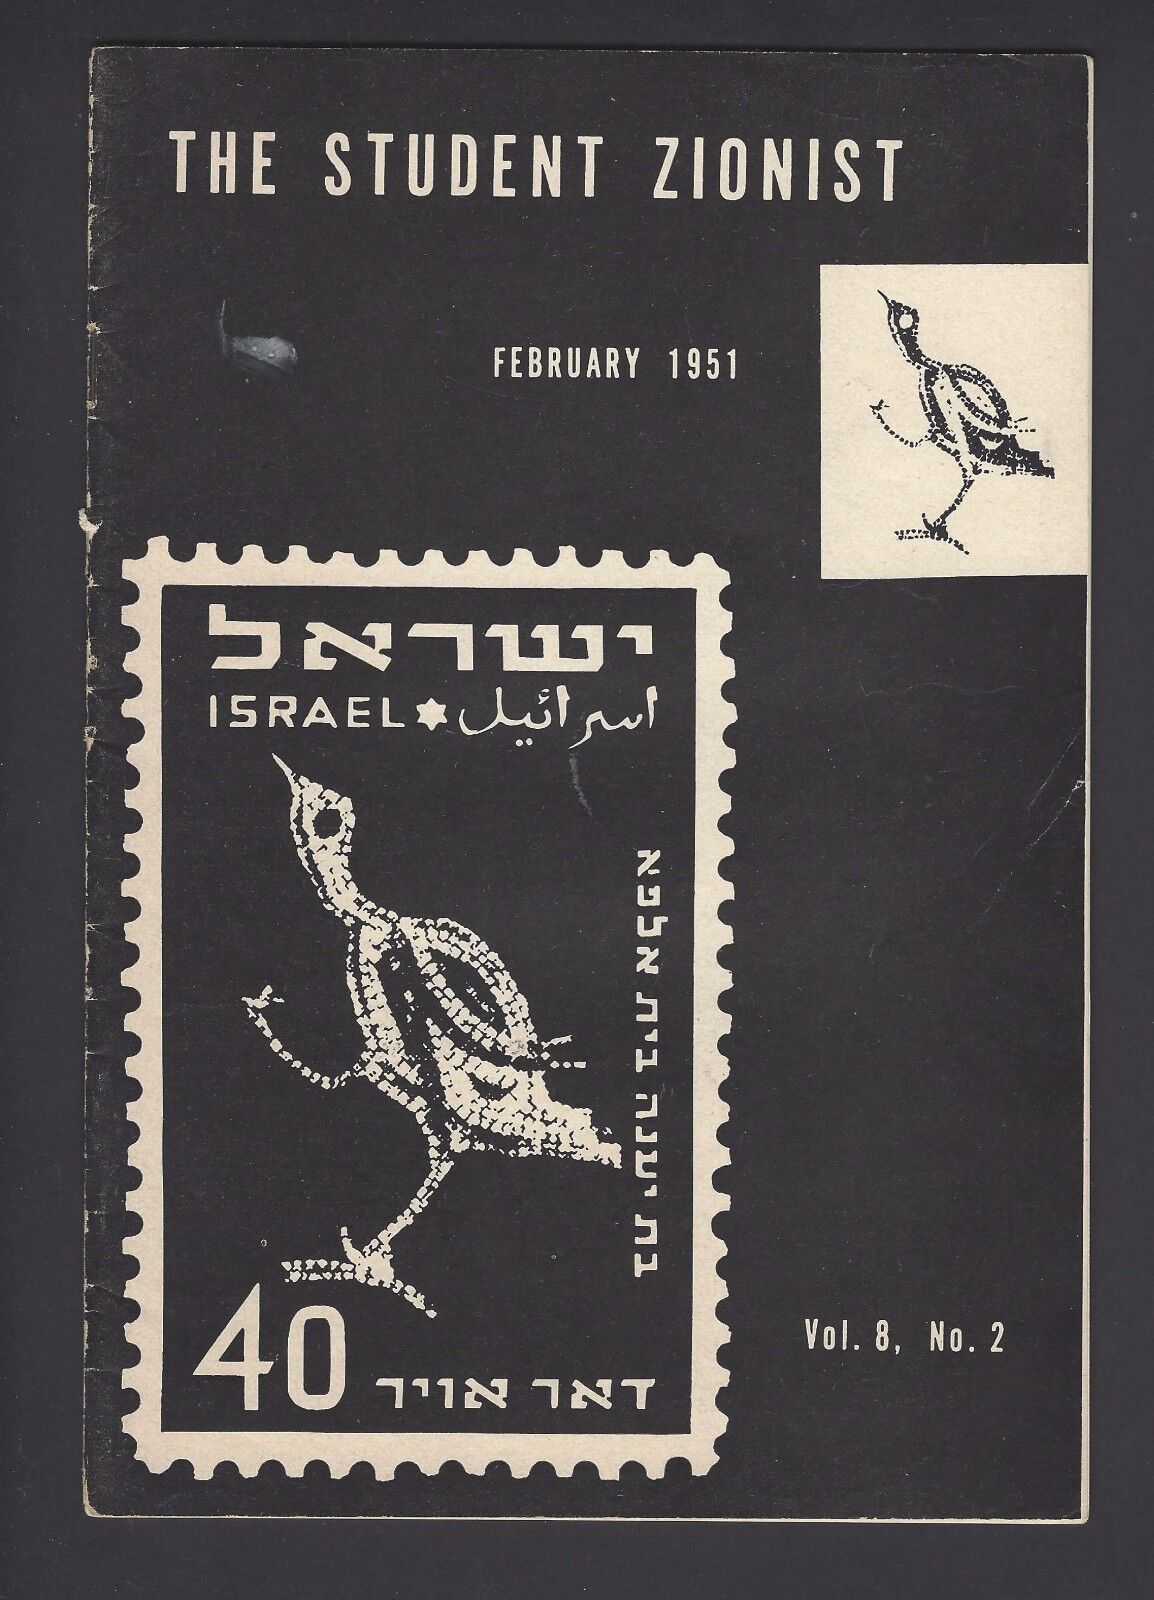 THE STUDENT ZIONIST FEB. 1951 EARLY ISRAEL PRO ZIONIST FROM THE US EPHEMERA